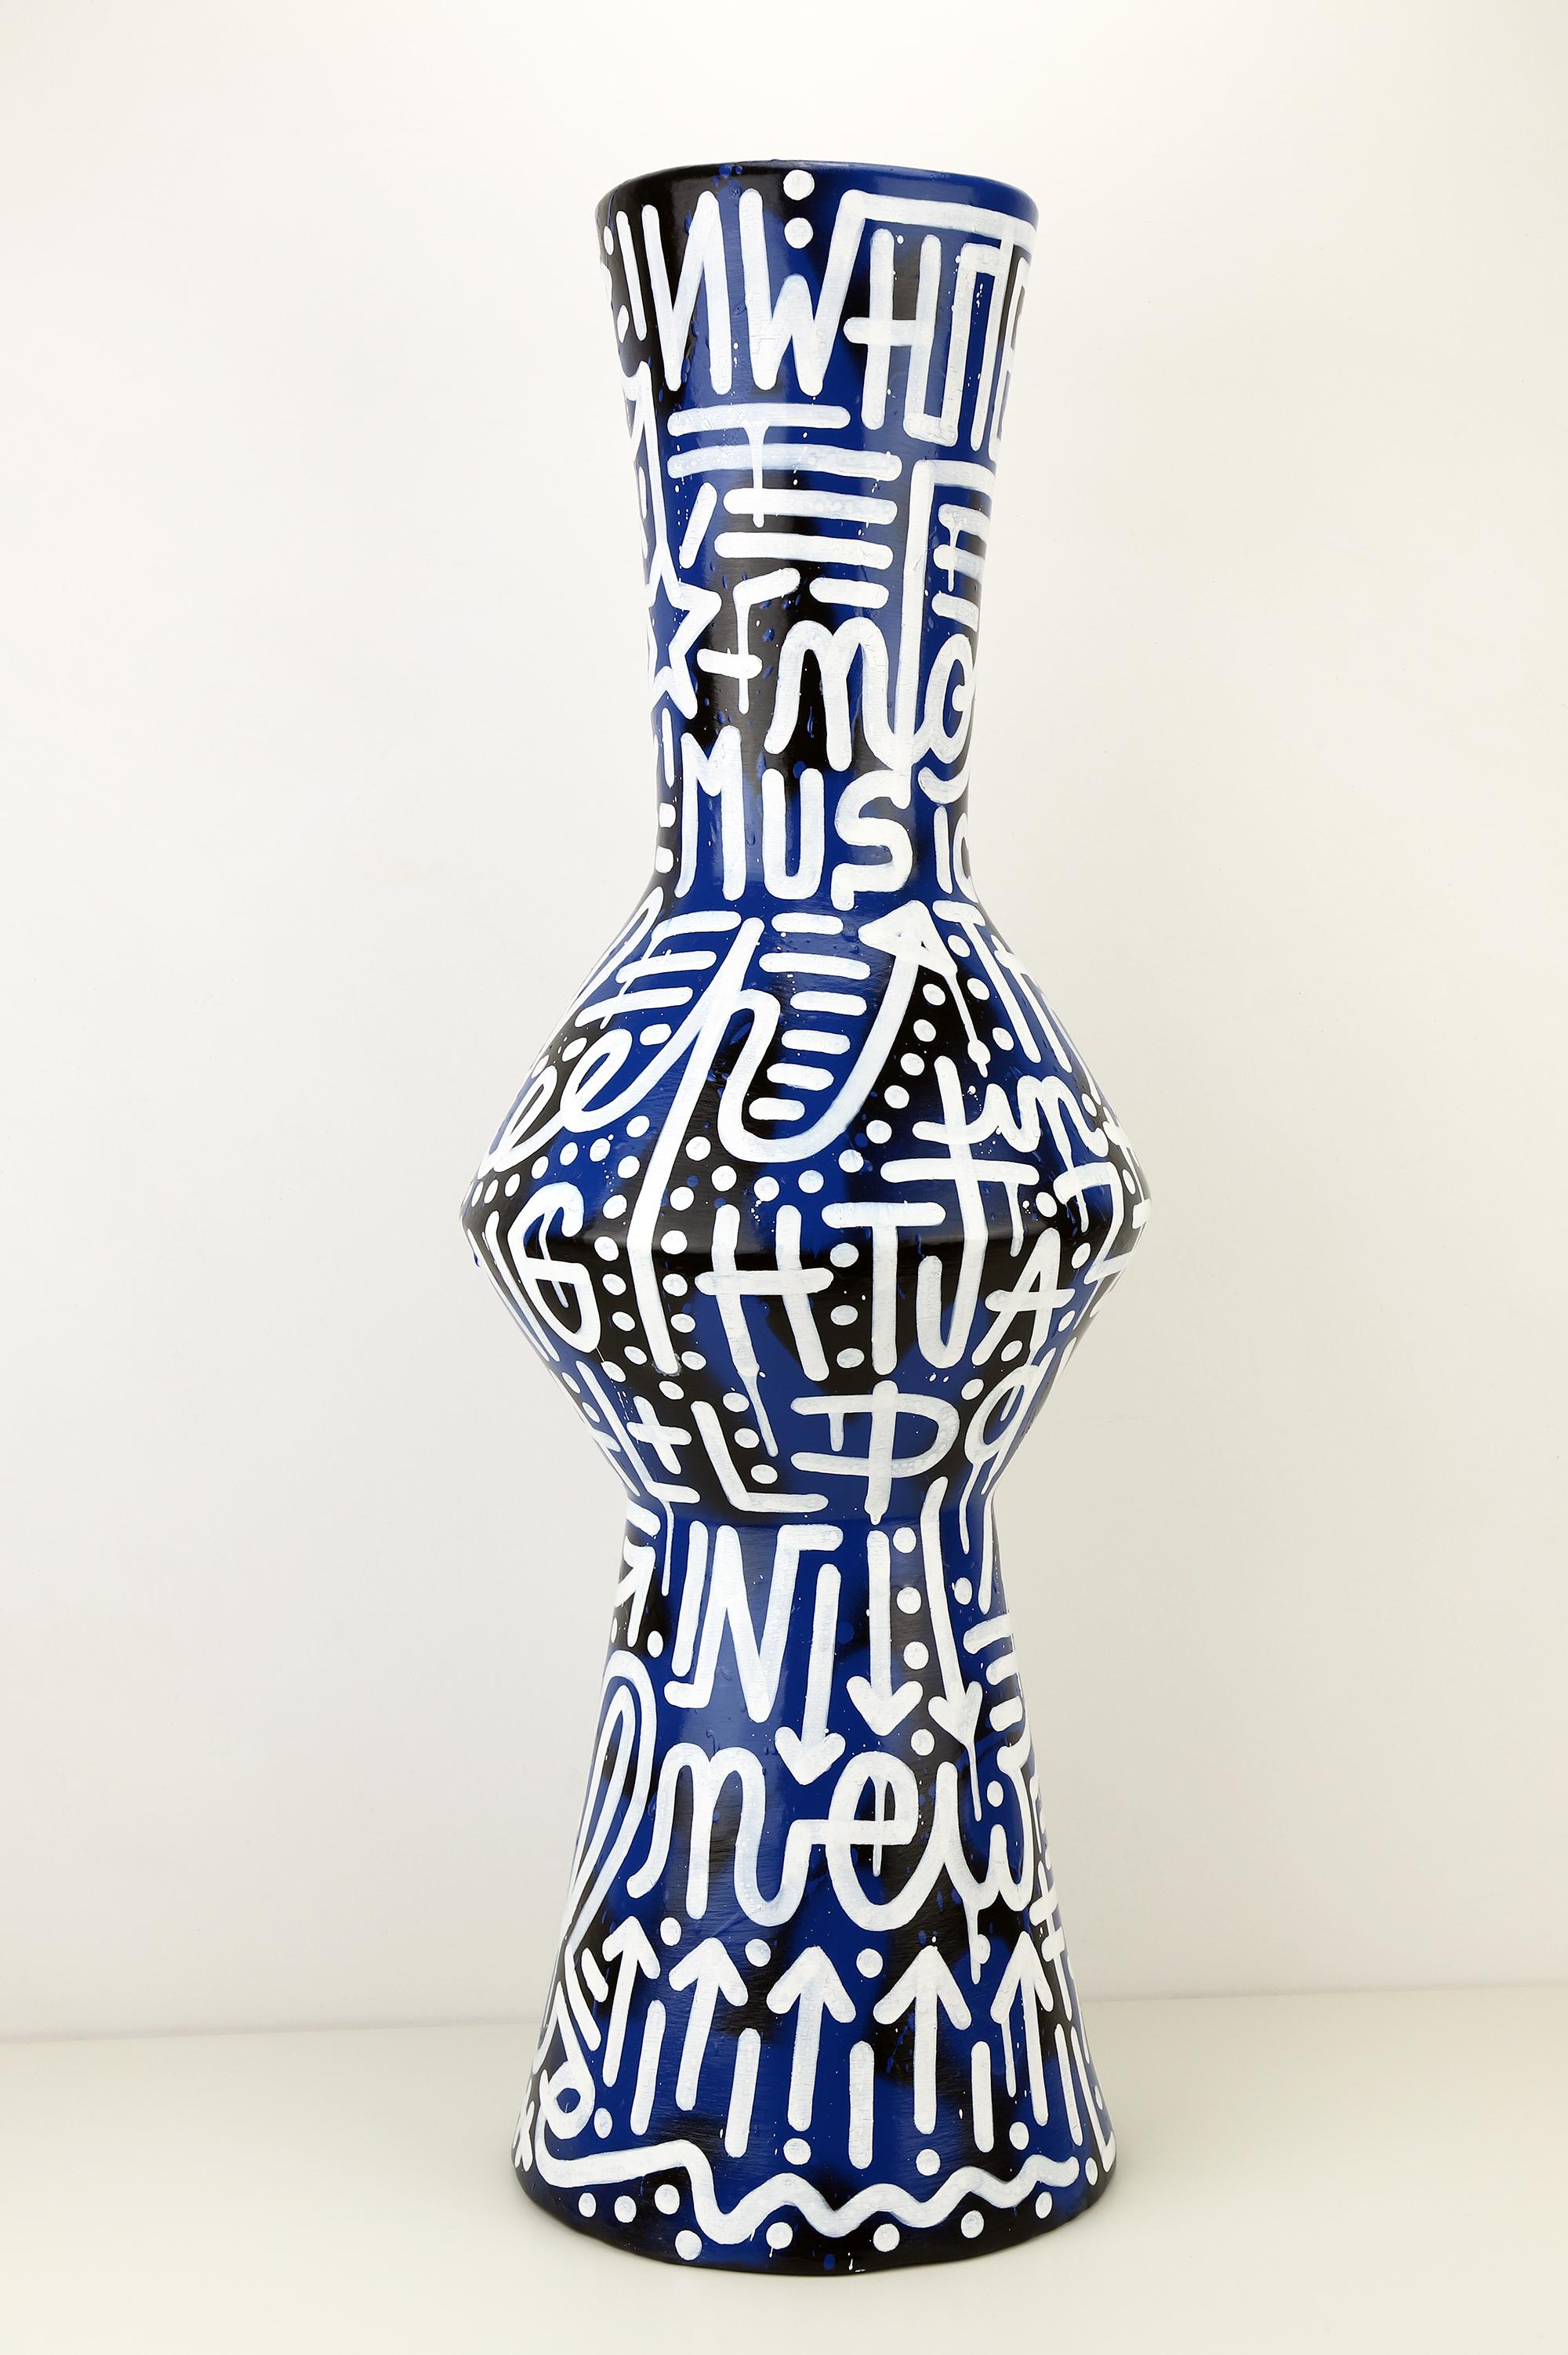 'Sleepless Night in New York' Acrylic and Spray Painted Ceramic Vase - Sculpture by Grégoire Devin